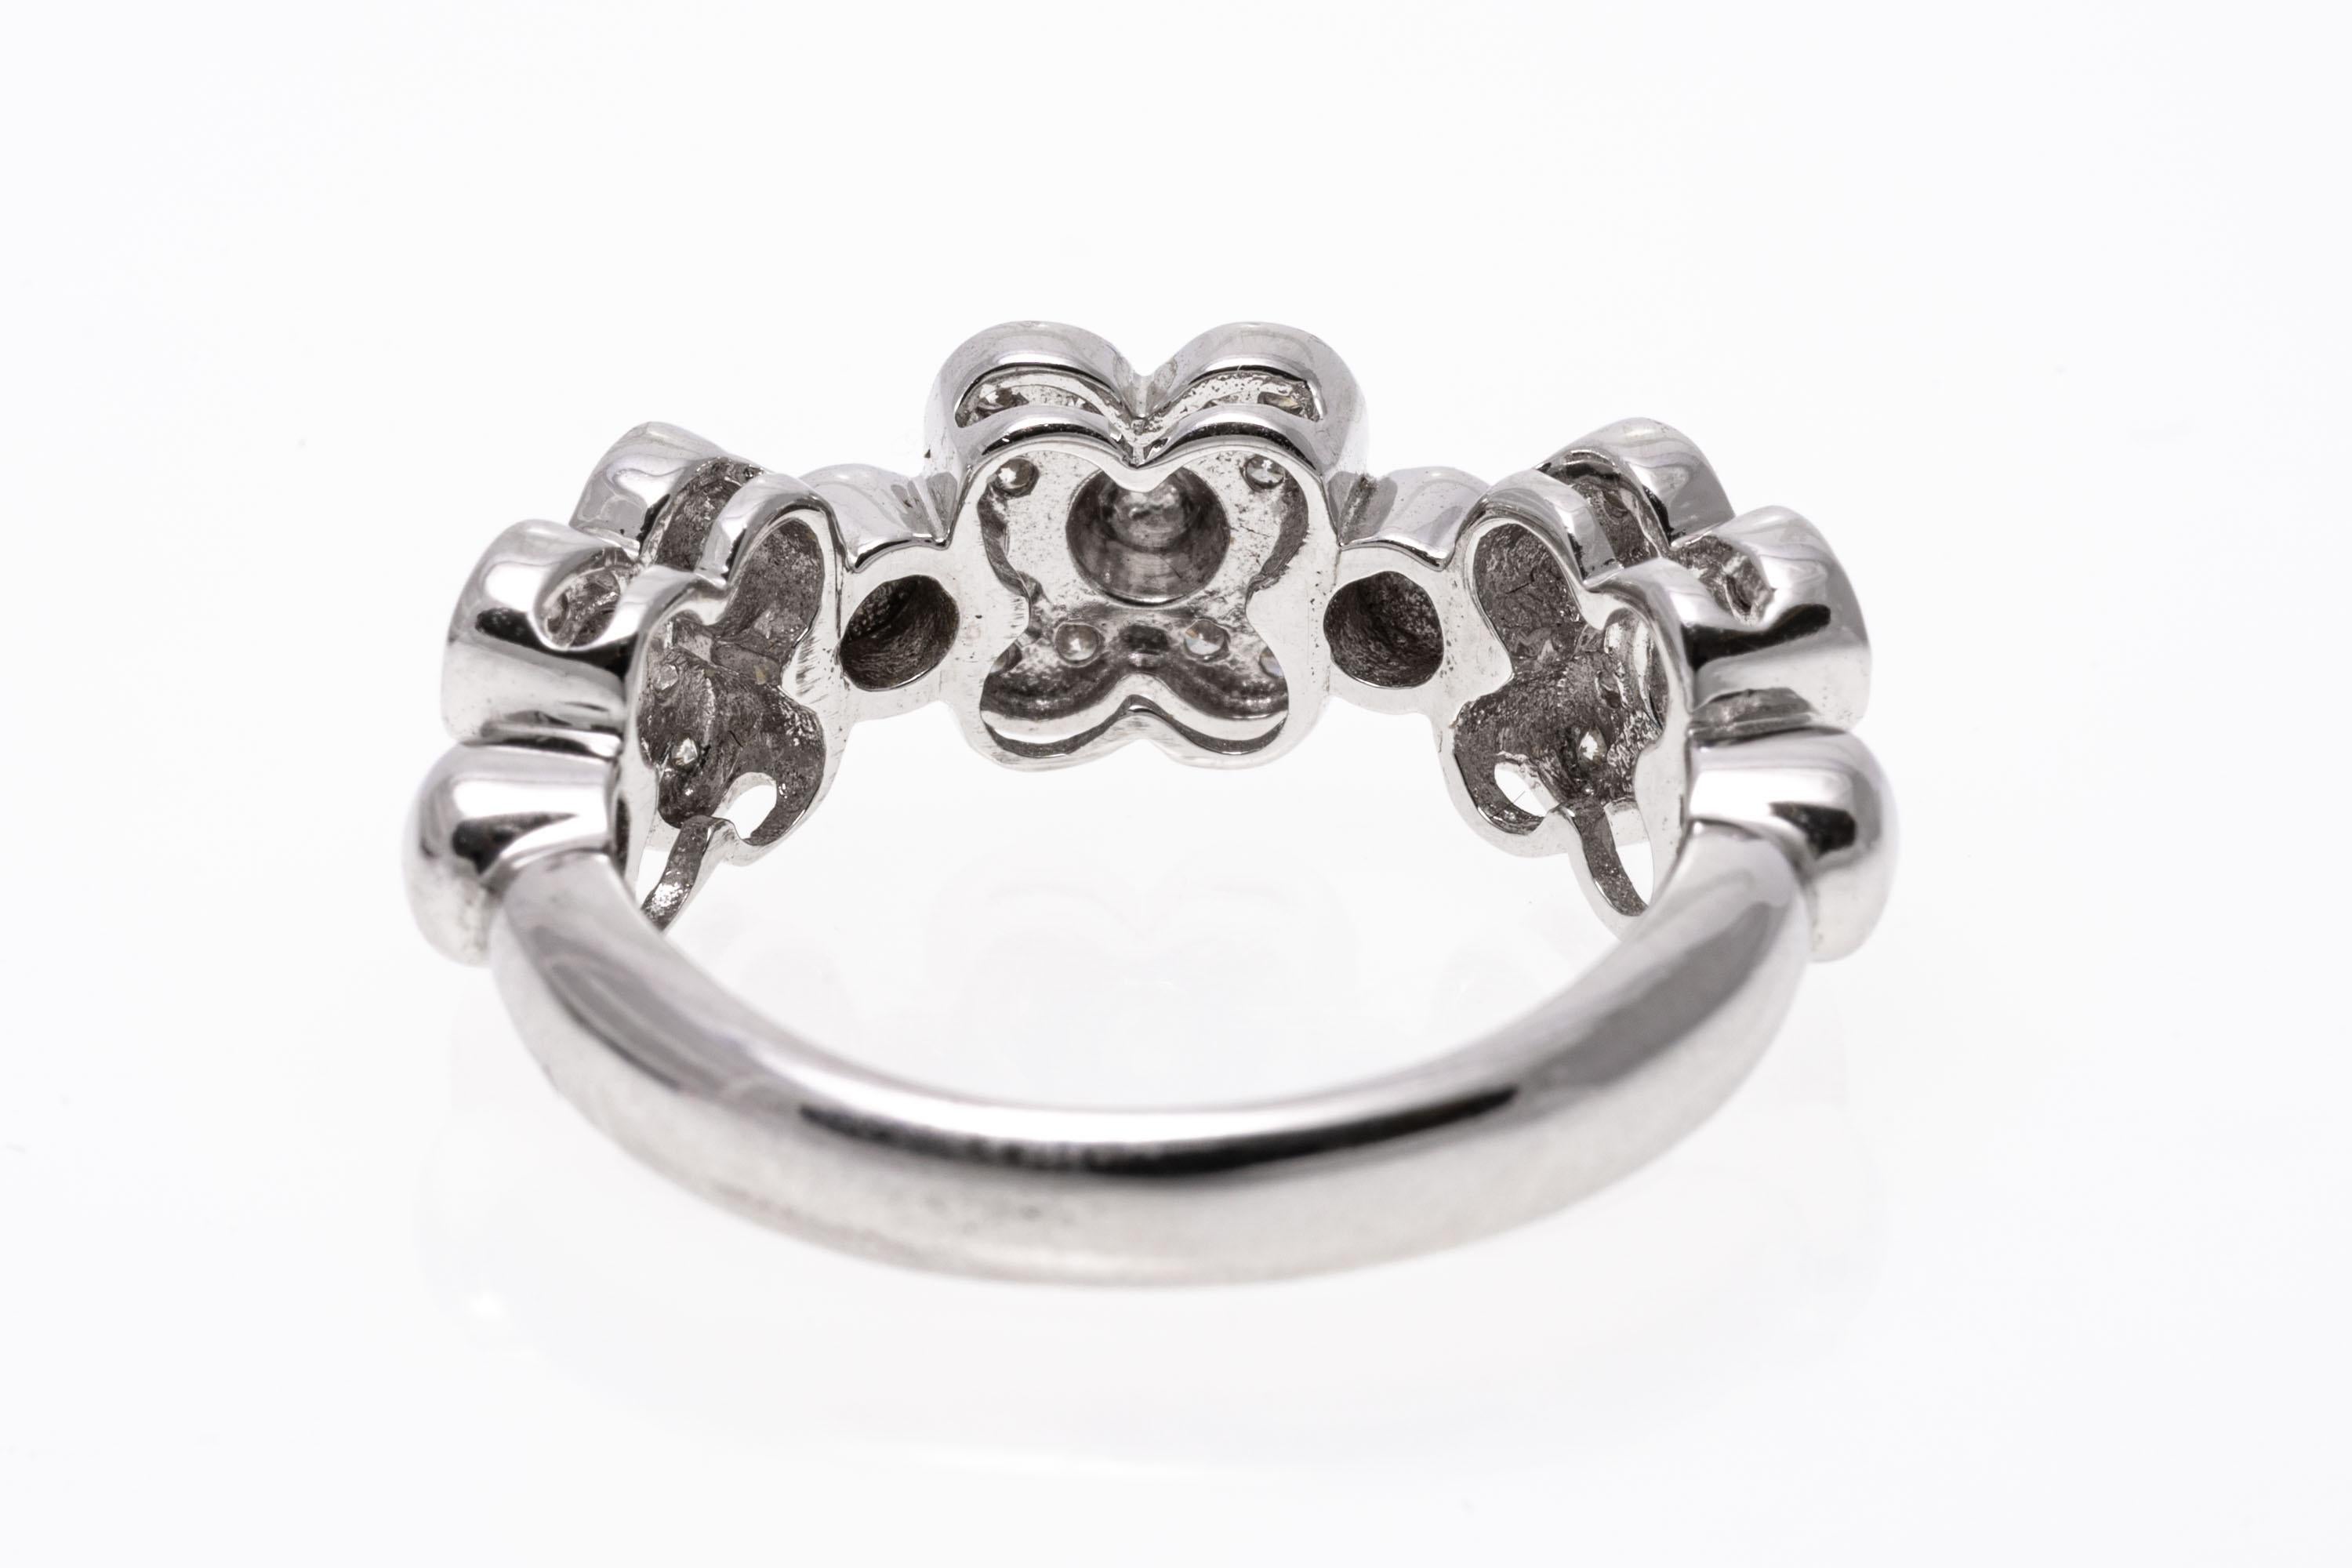 18k White Gold Quatrefoil Flower Motif Band Ring With Pave Diamonds, Size 6.75 In Good Condition For Sale In Southport, CT